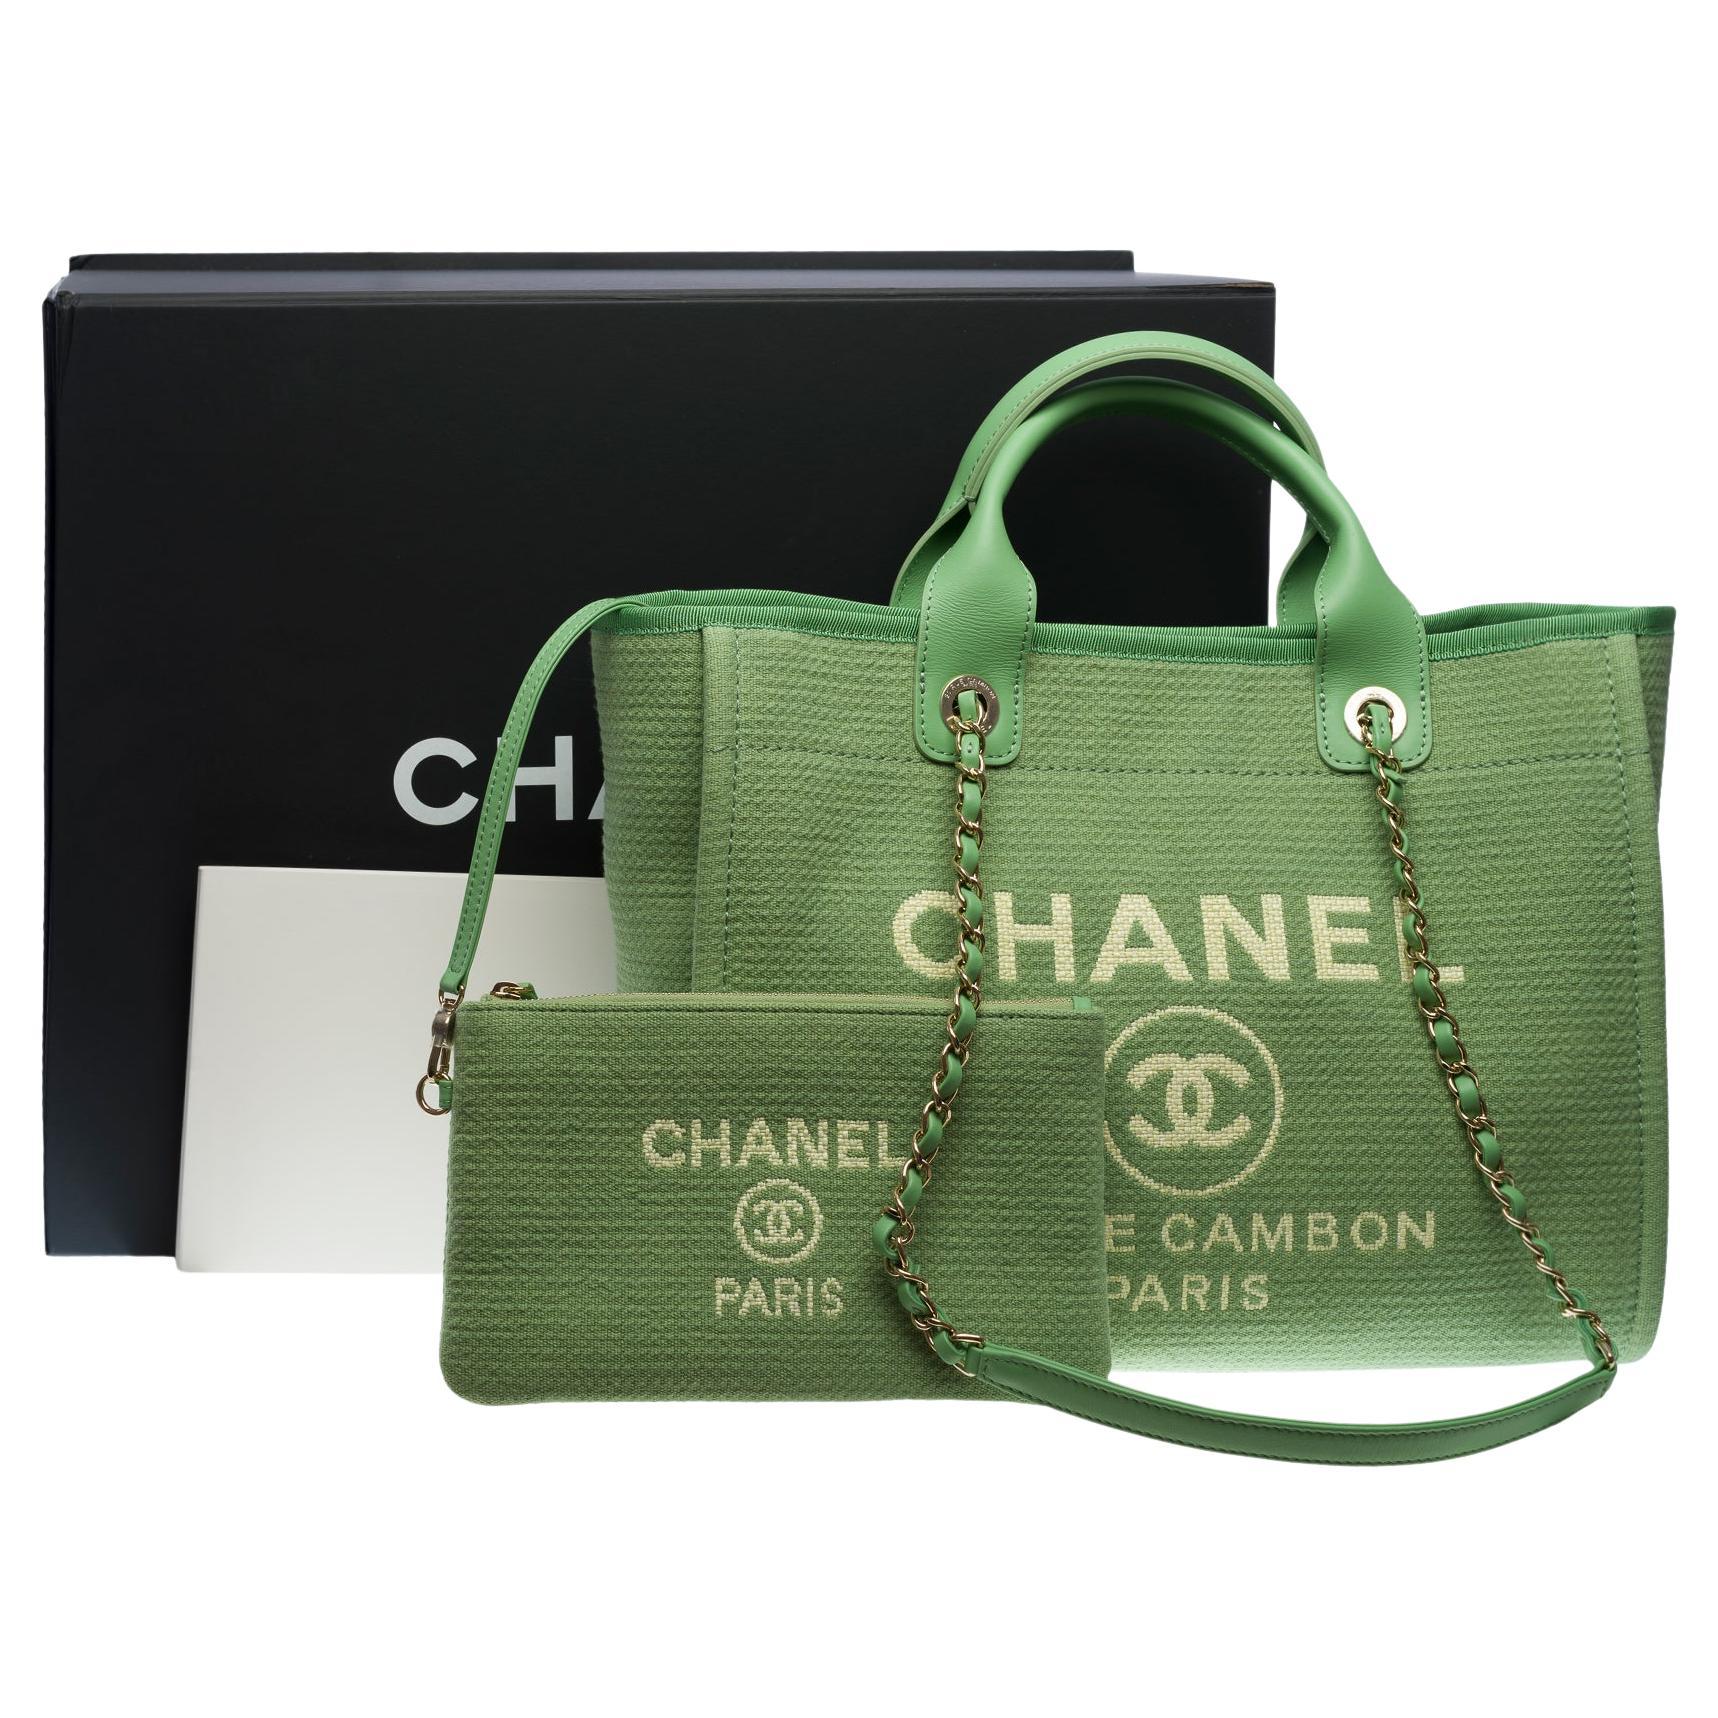 New Amazing limited edition Chanel Deauville Tote bag in Green